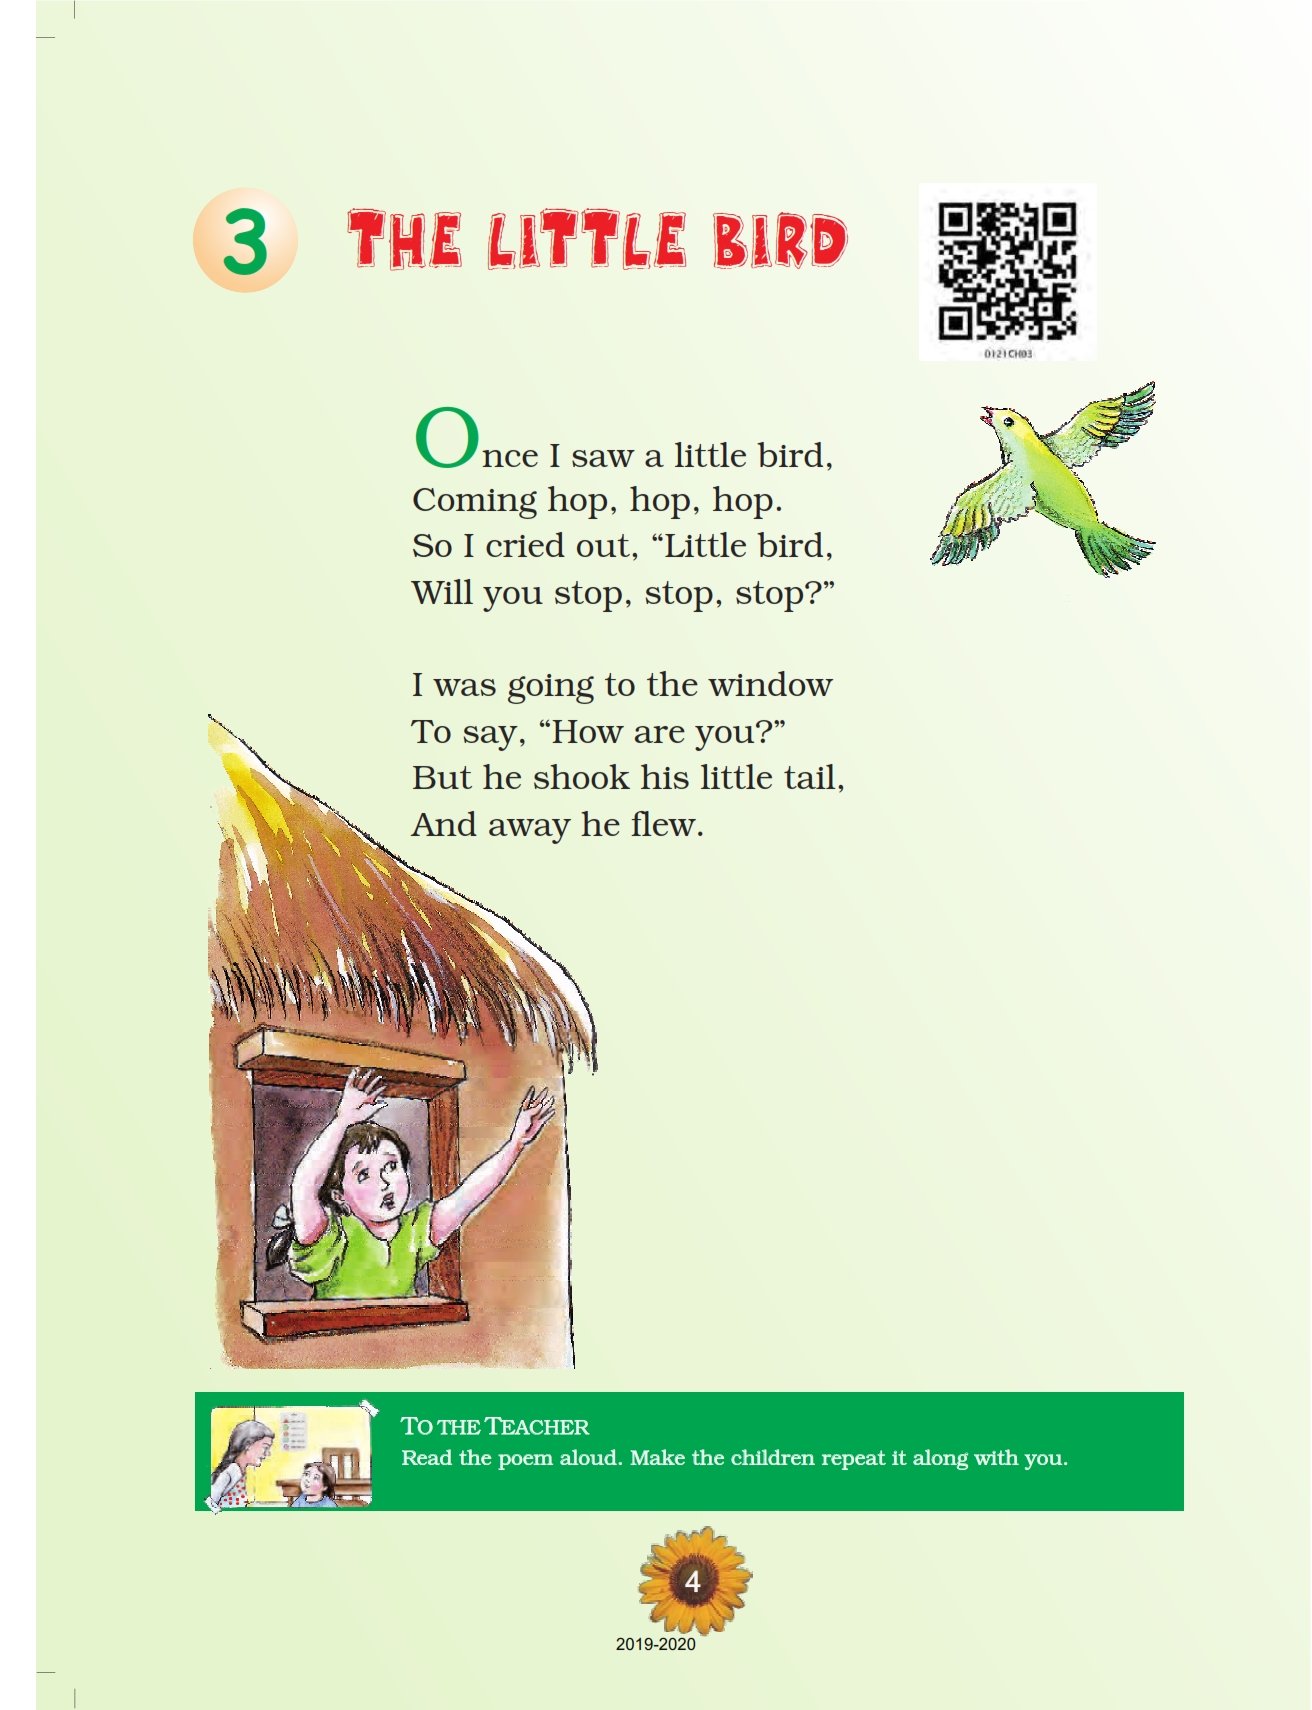 NCERT Book Class 1 English (Raindrops) Chapter 3 The Little Bird - Page 1